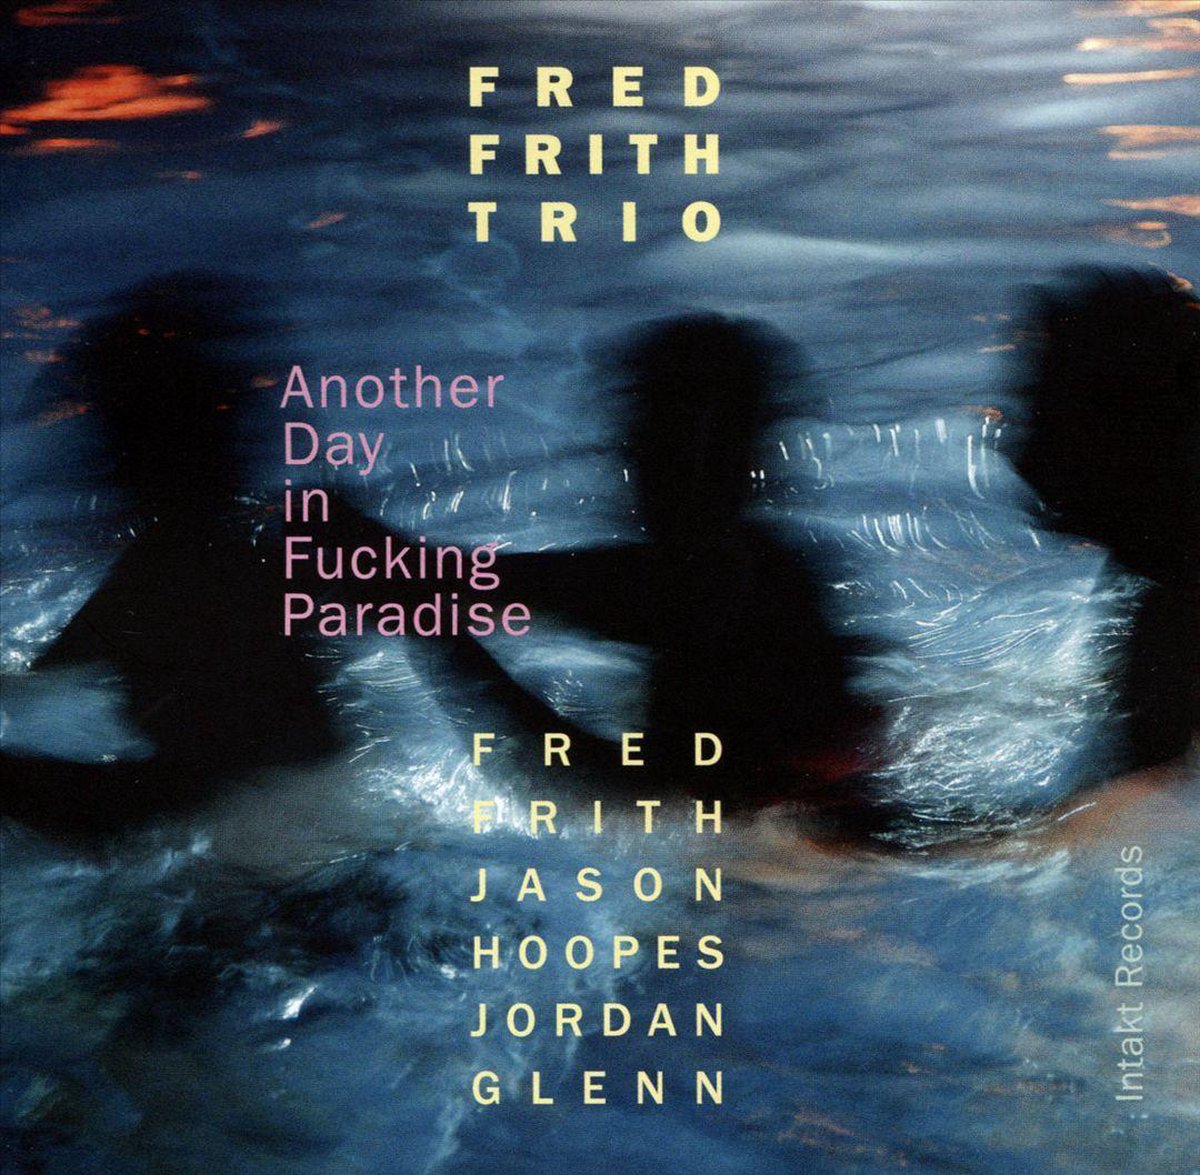 Fred Frith Trio: Another Day in Fucking Paradise